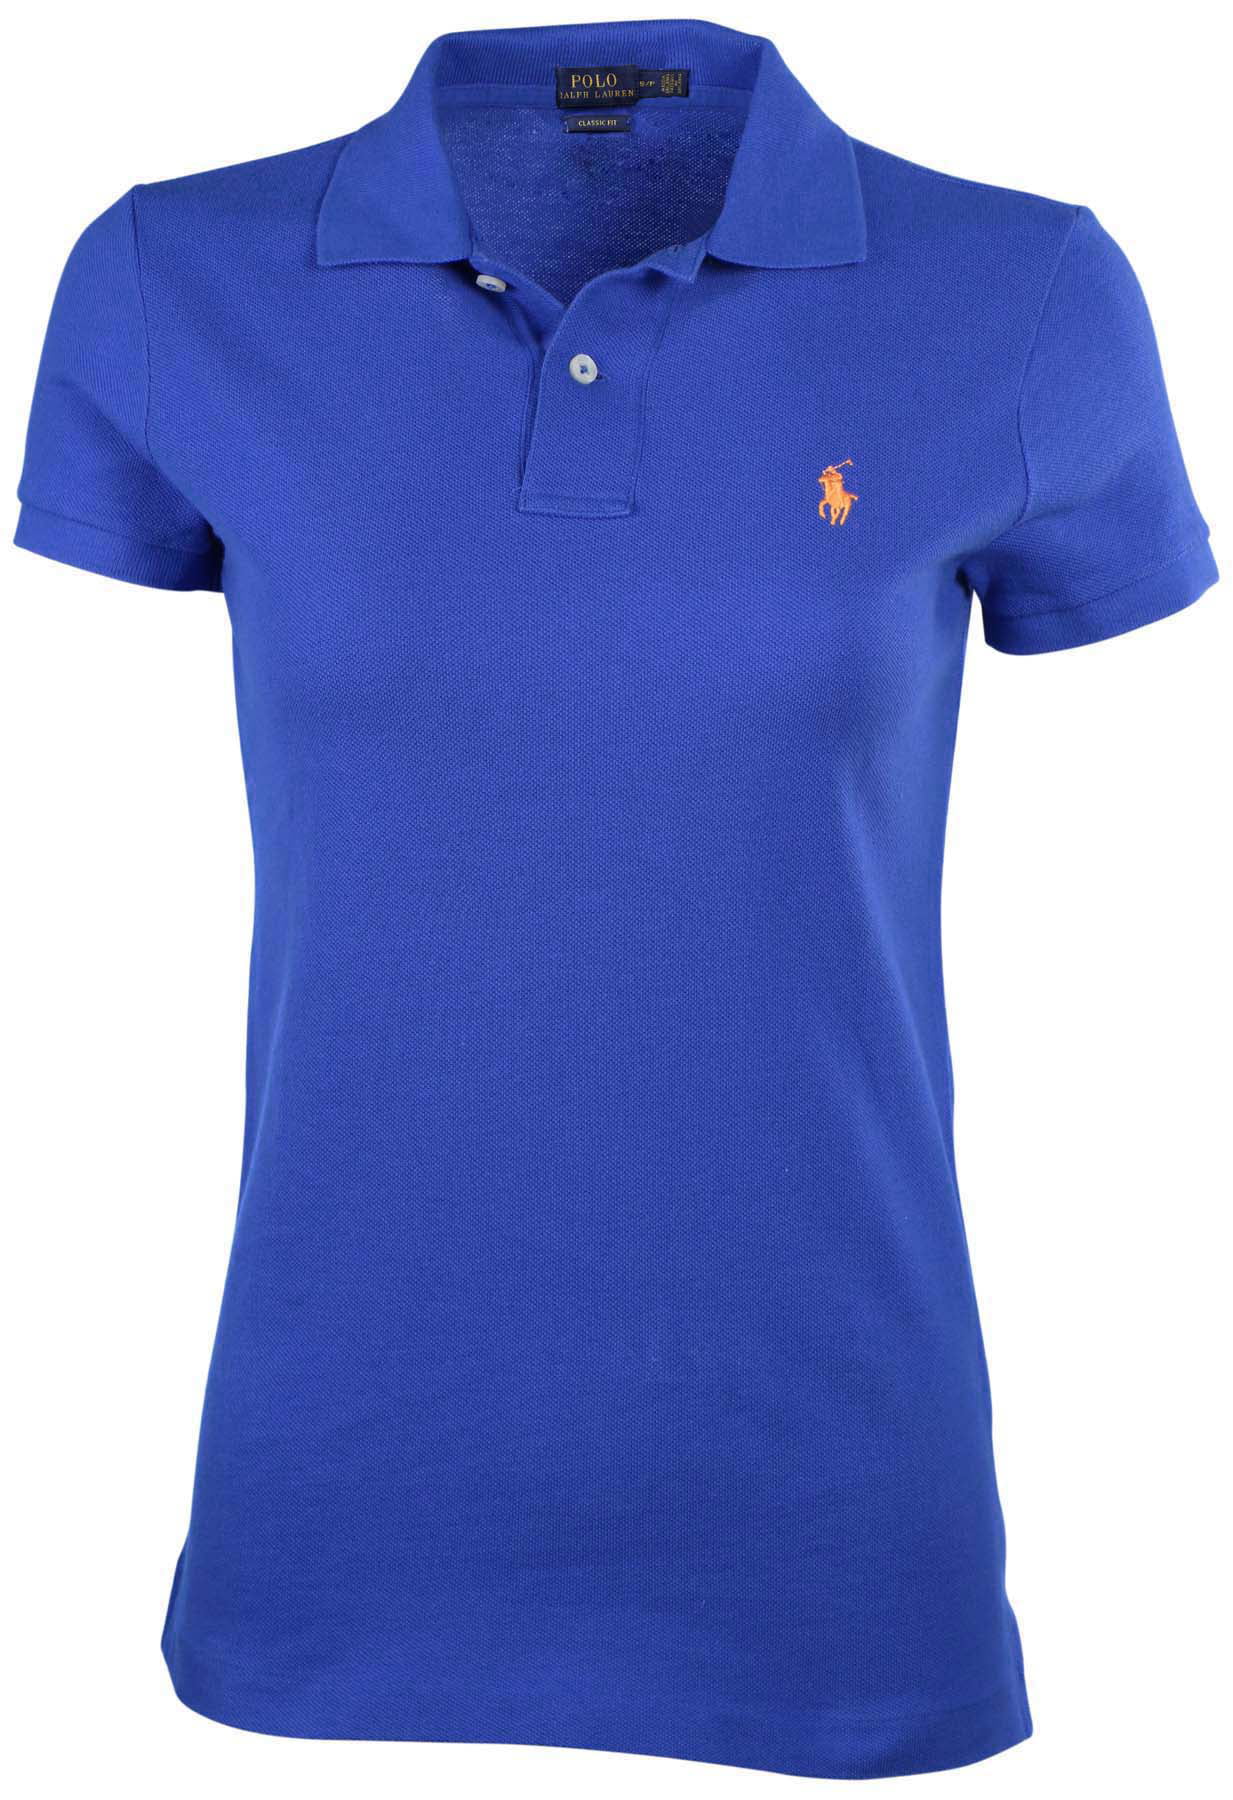 Polo Ralph Lauren Women's Classic Fit Mesh Pony Shirt-Bright Imperial ...